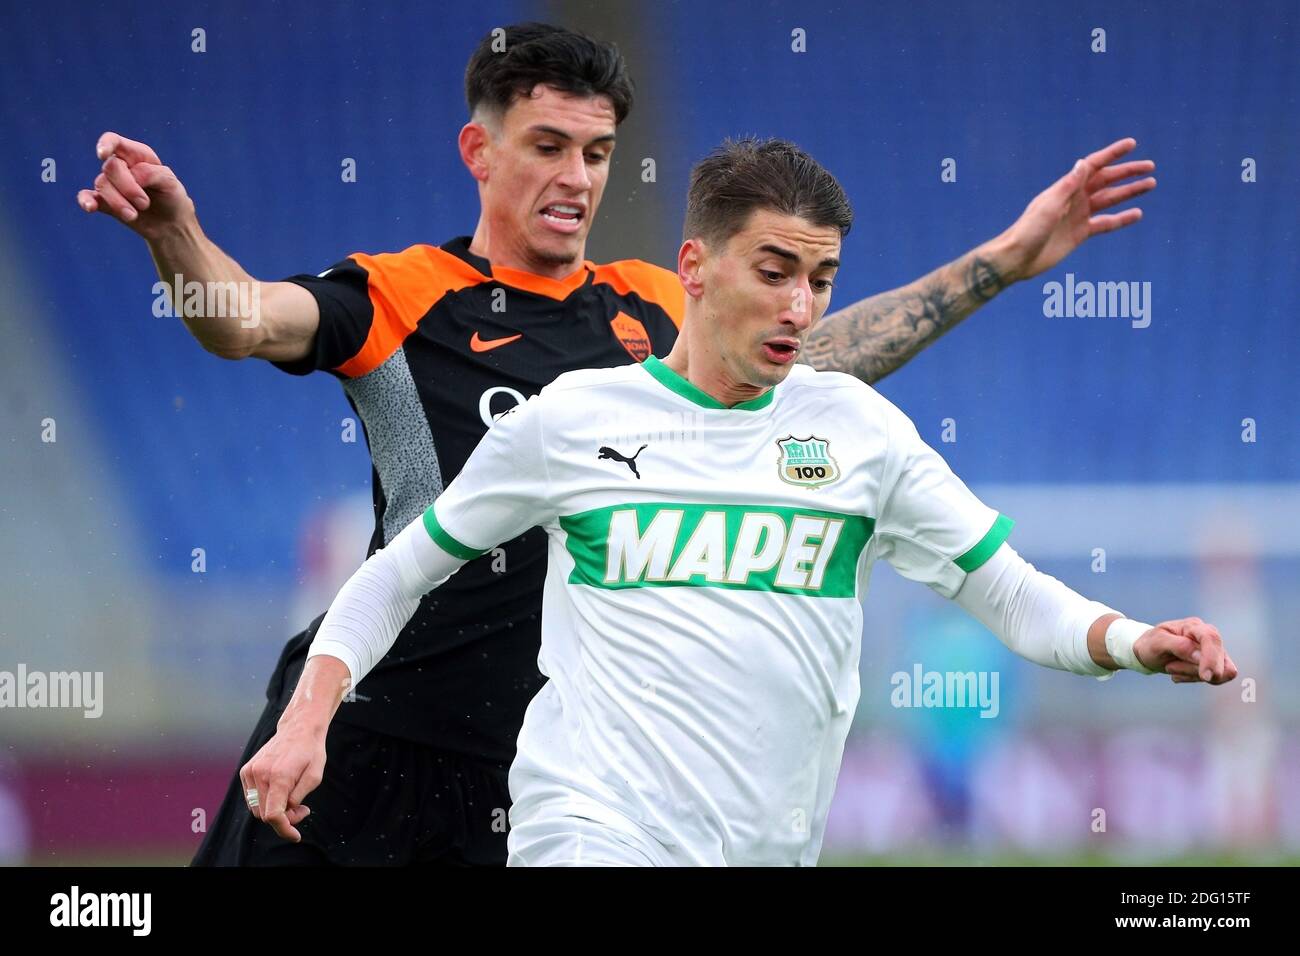 Marash Kumbulla of Roma (L) fights for the ball with Filip Djuricic of Sassuolo (R) during the Italian championship Serie A / LM Stock Photo